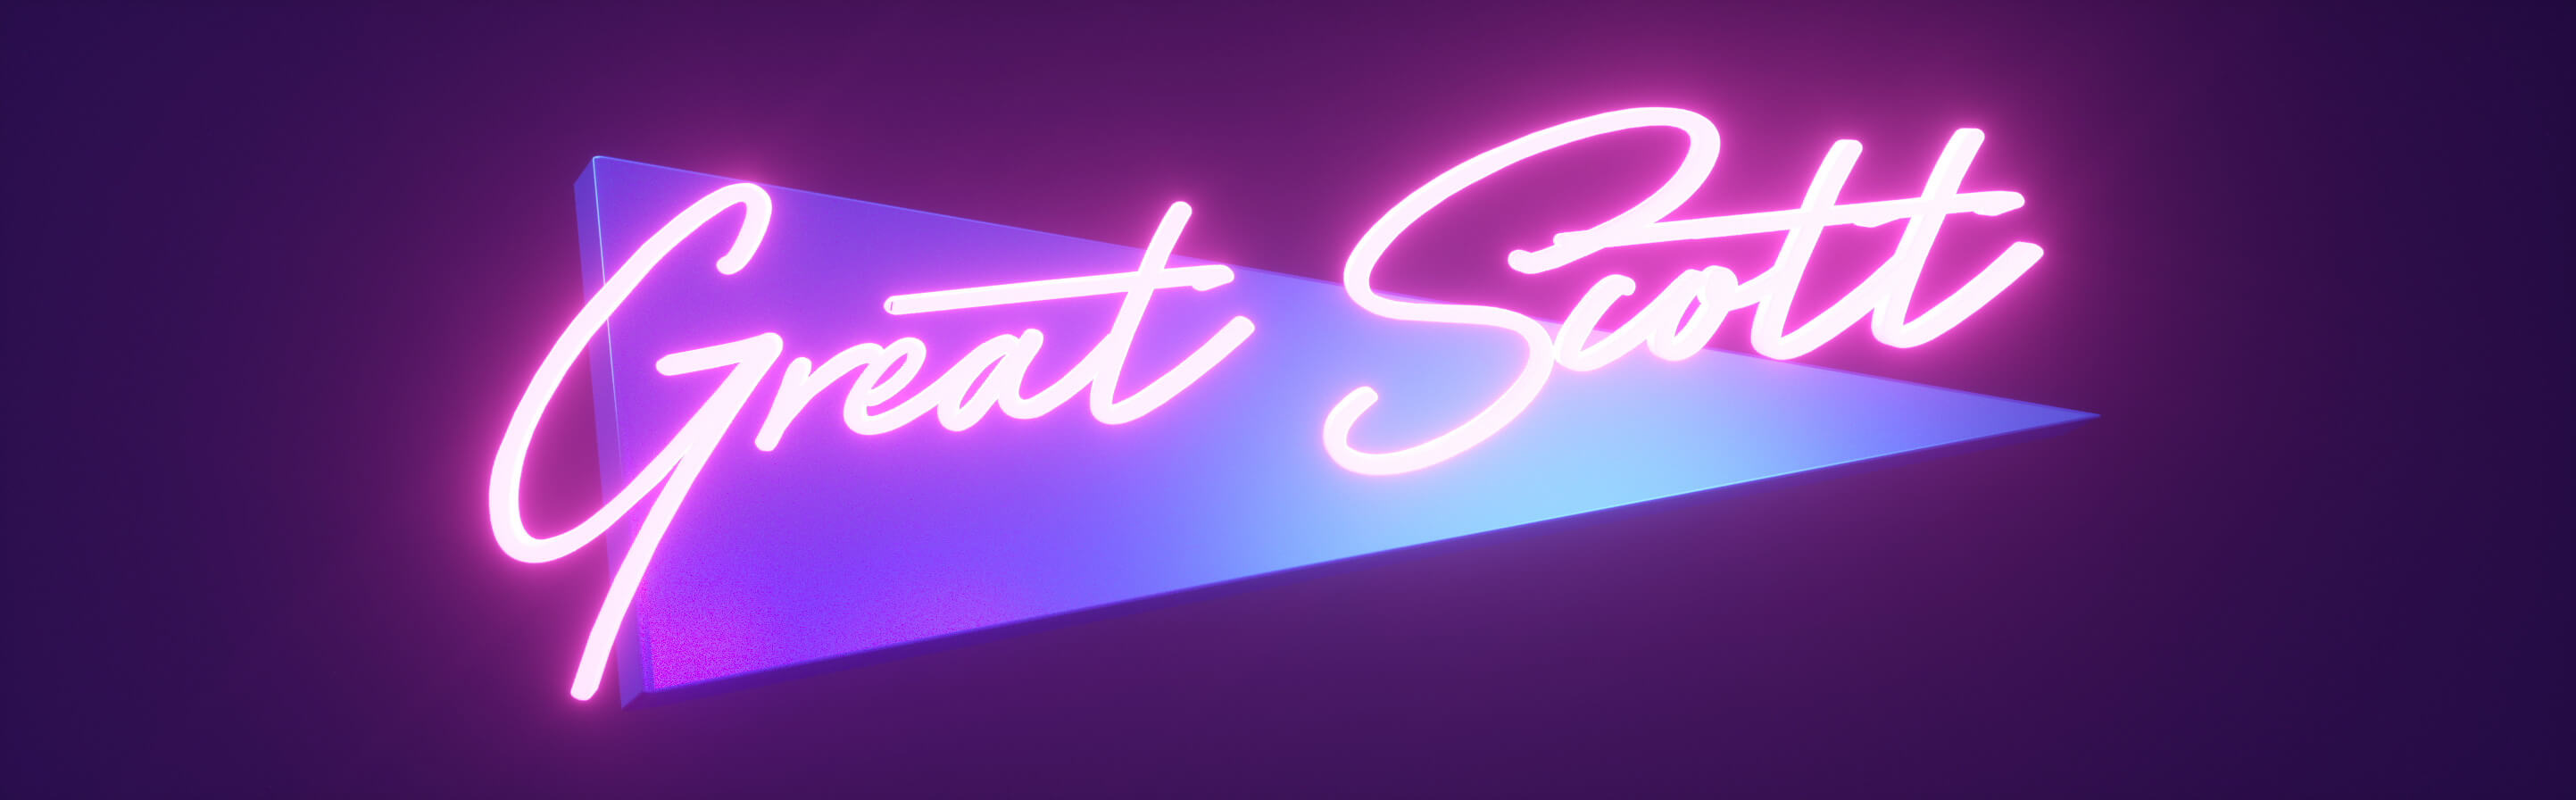 Great scott! neon sign of catchphrase from Back to the Future